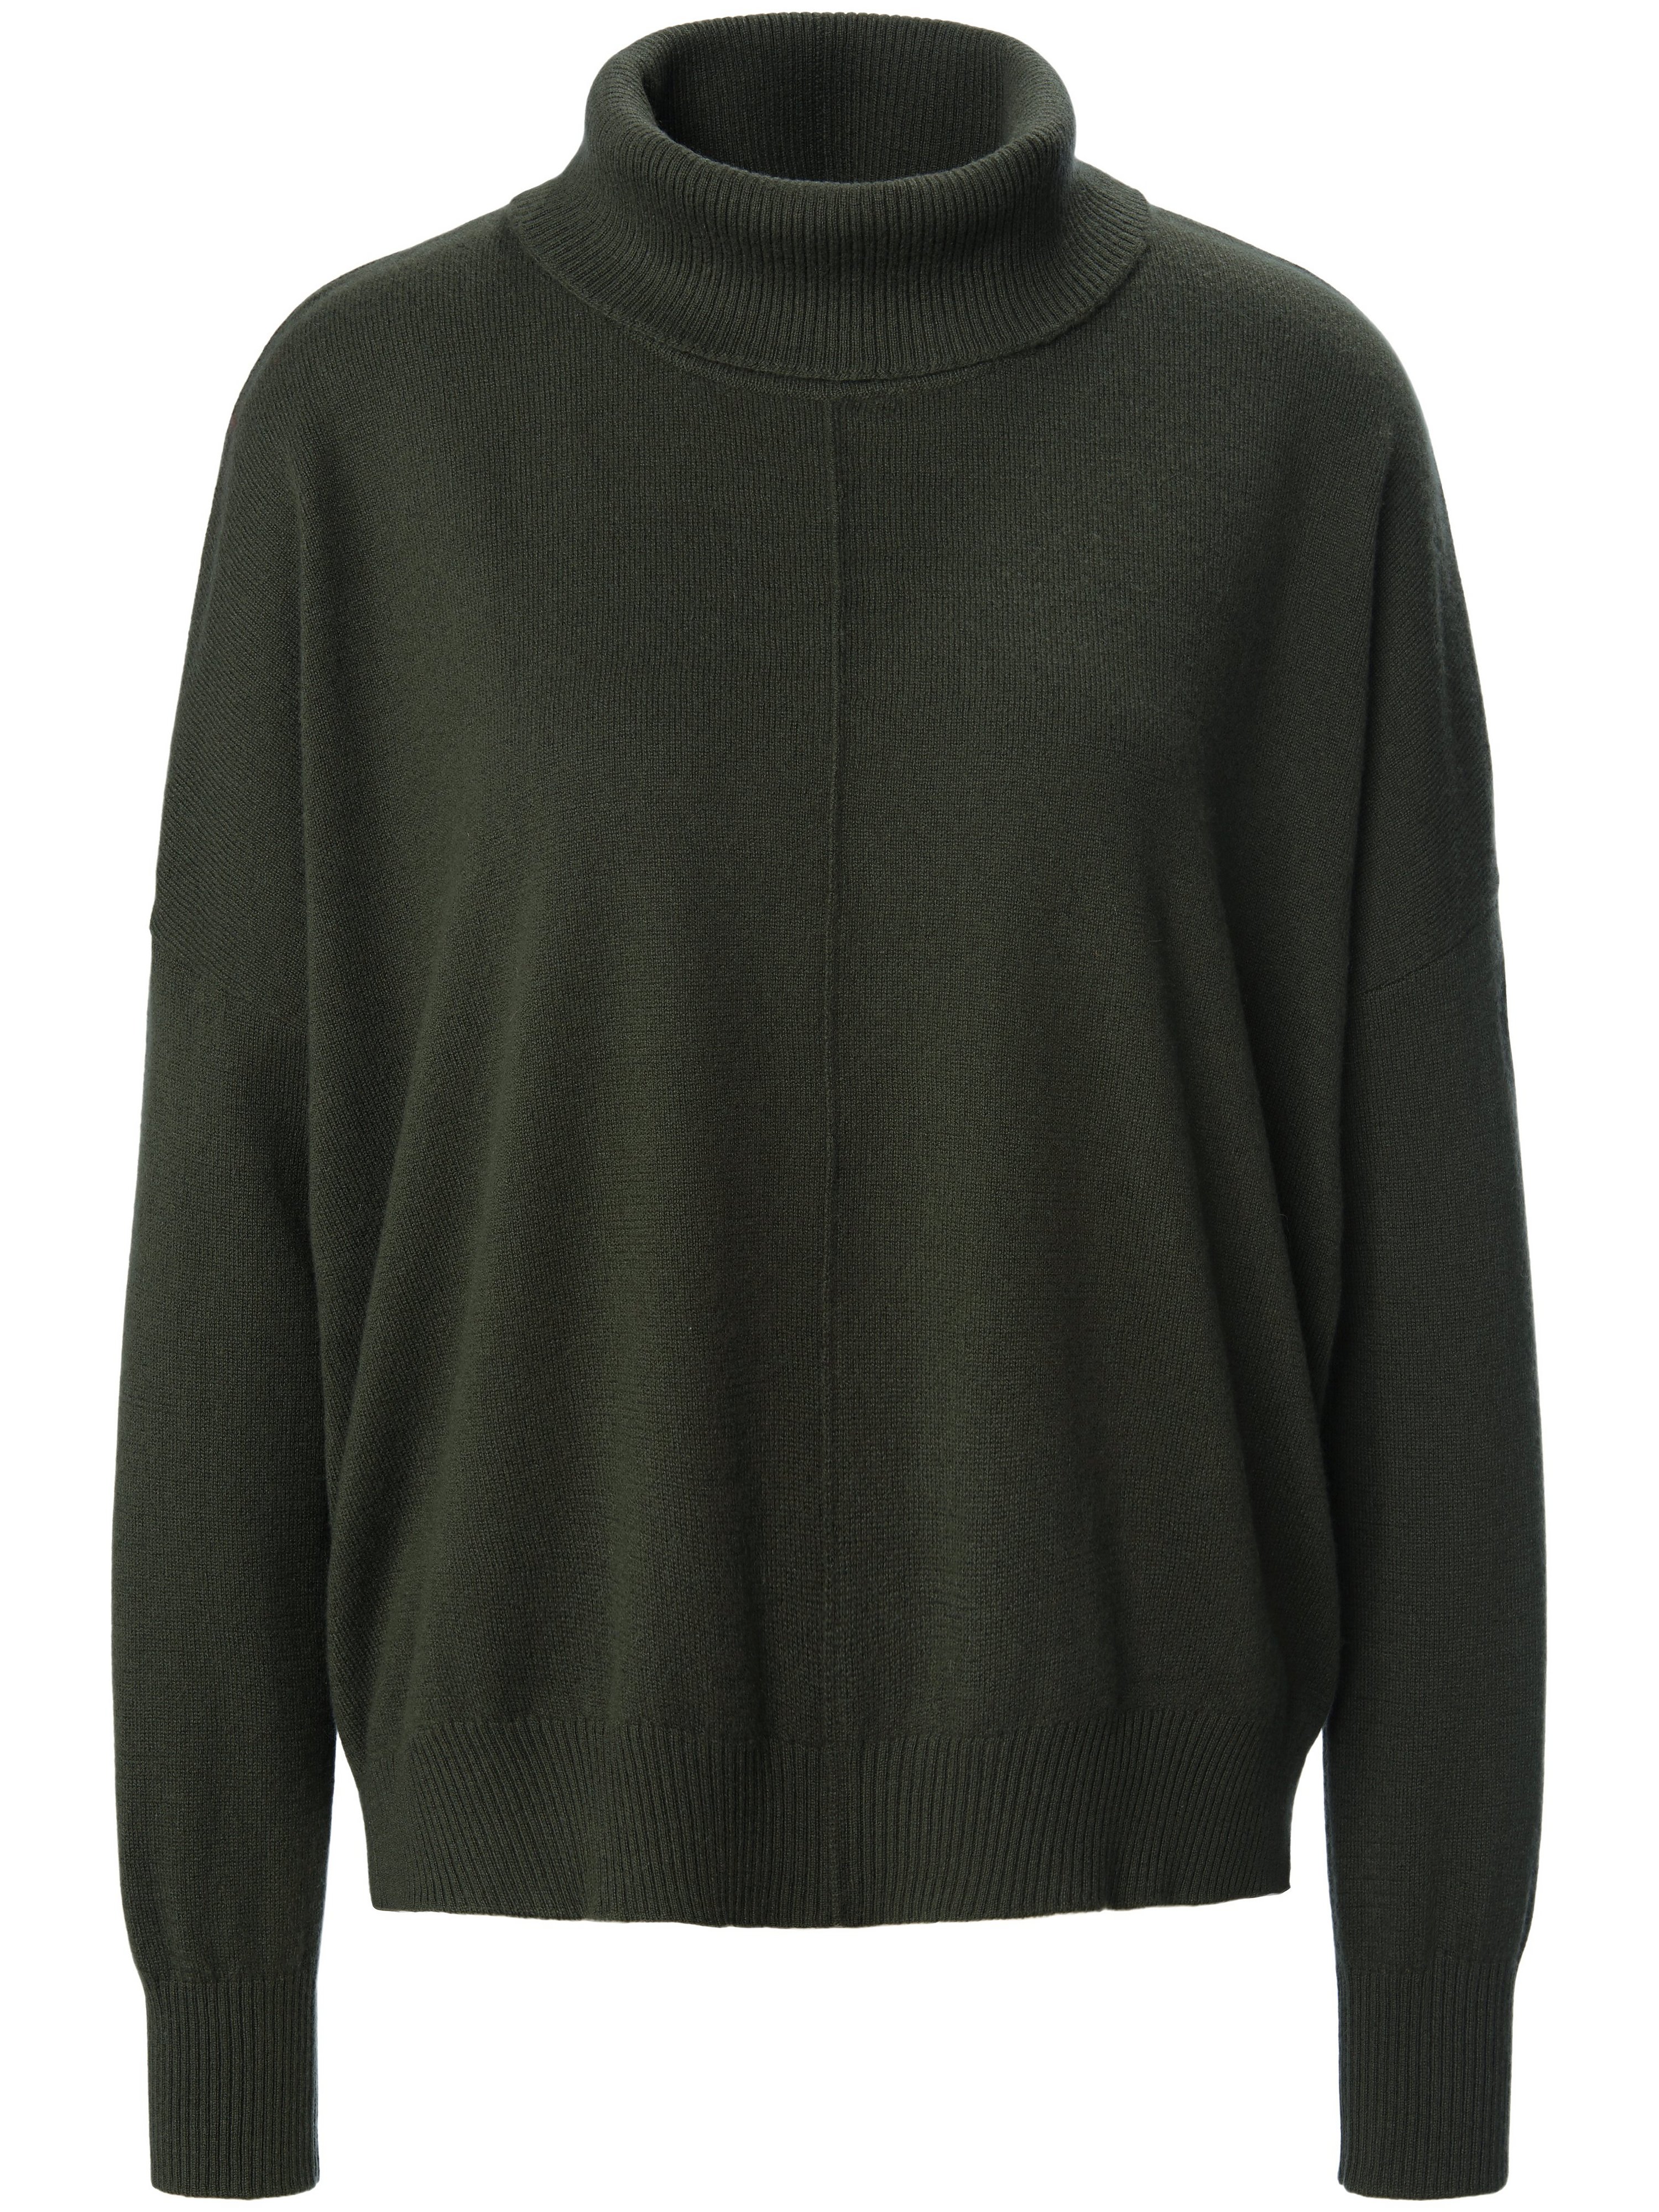 Le pull 100% cachemire  include vert taille 46